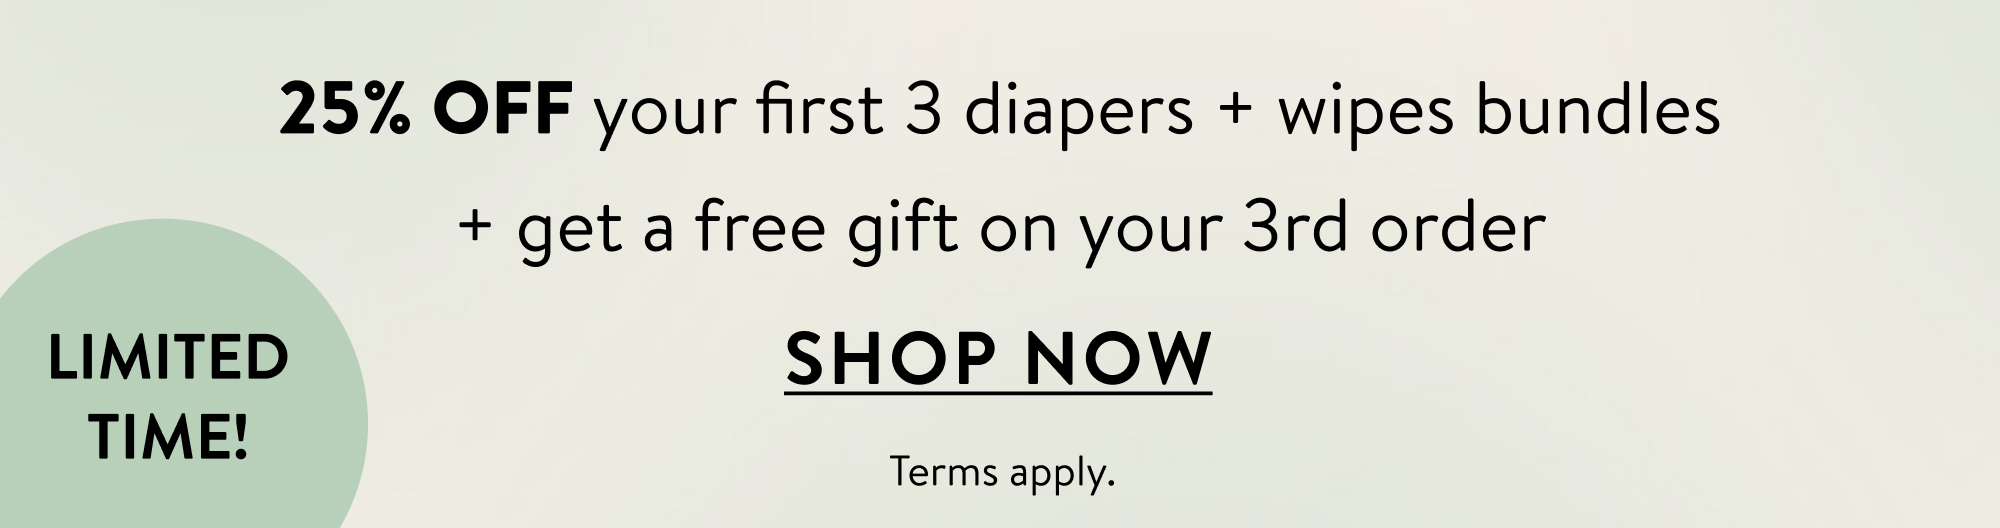 Limited time! 25% off your first 3 diapers + wipes bundles + get a free gift on your 3rd order. Shop Now. Terms Apply.